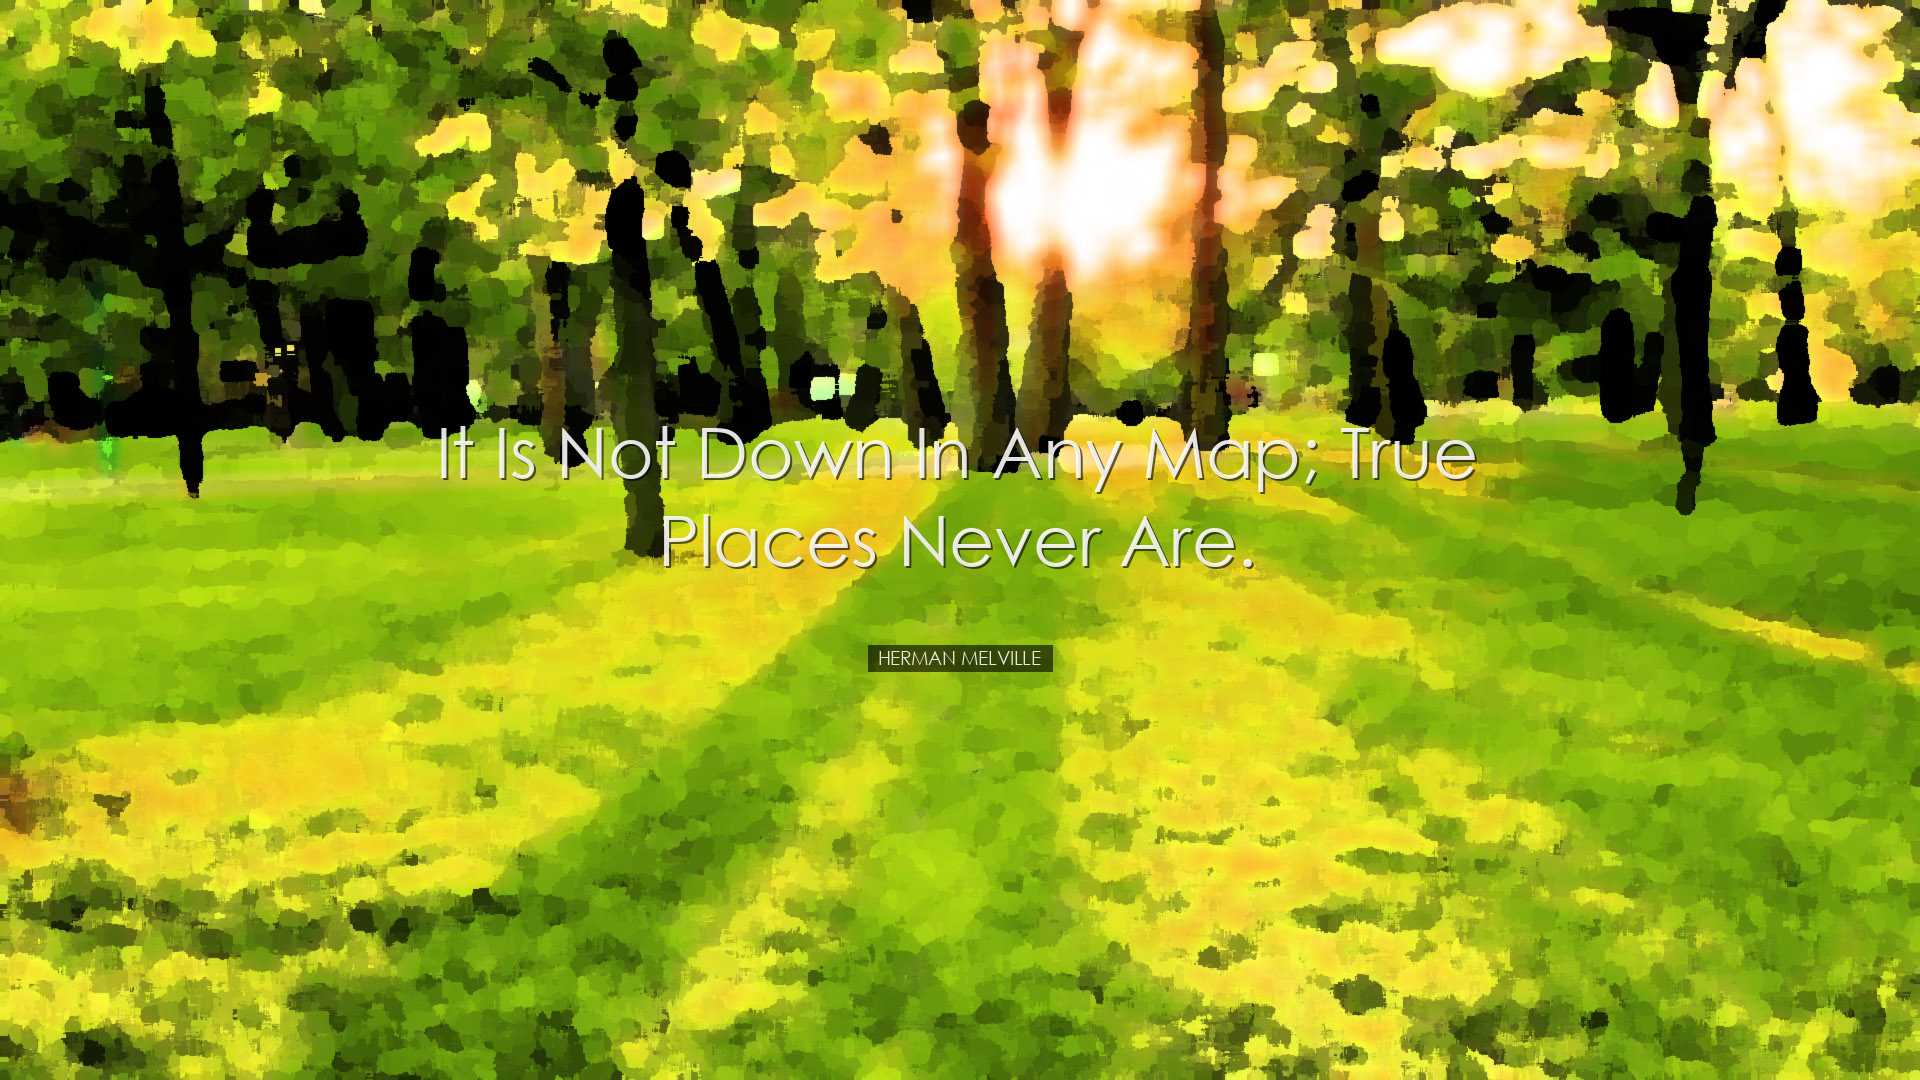 It is not down in any map; true places never are. - Herman Melvill